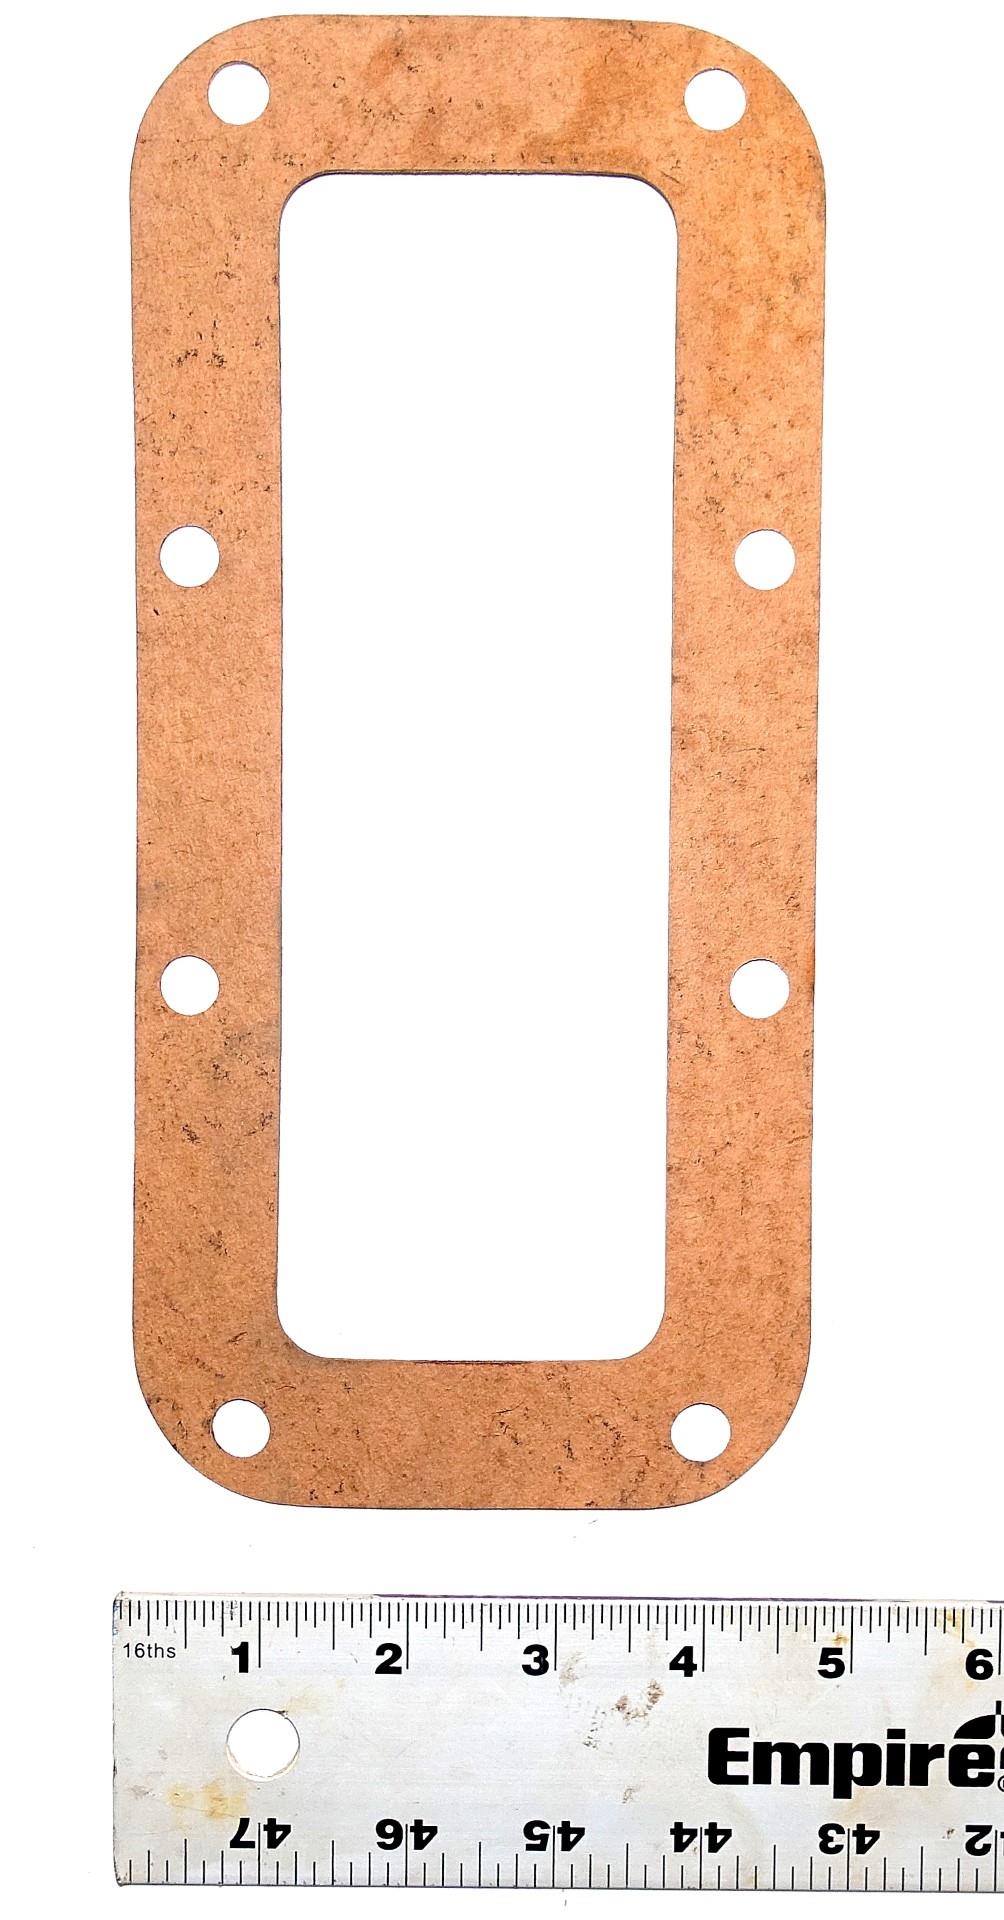 M35-691 | M35-691 Differential Top Cover Gasket for M35A2 Multifuel Series (6).JPG